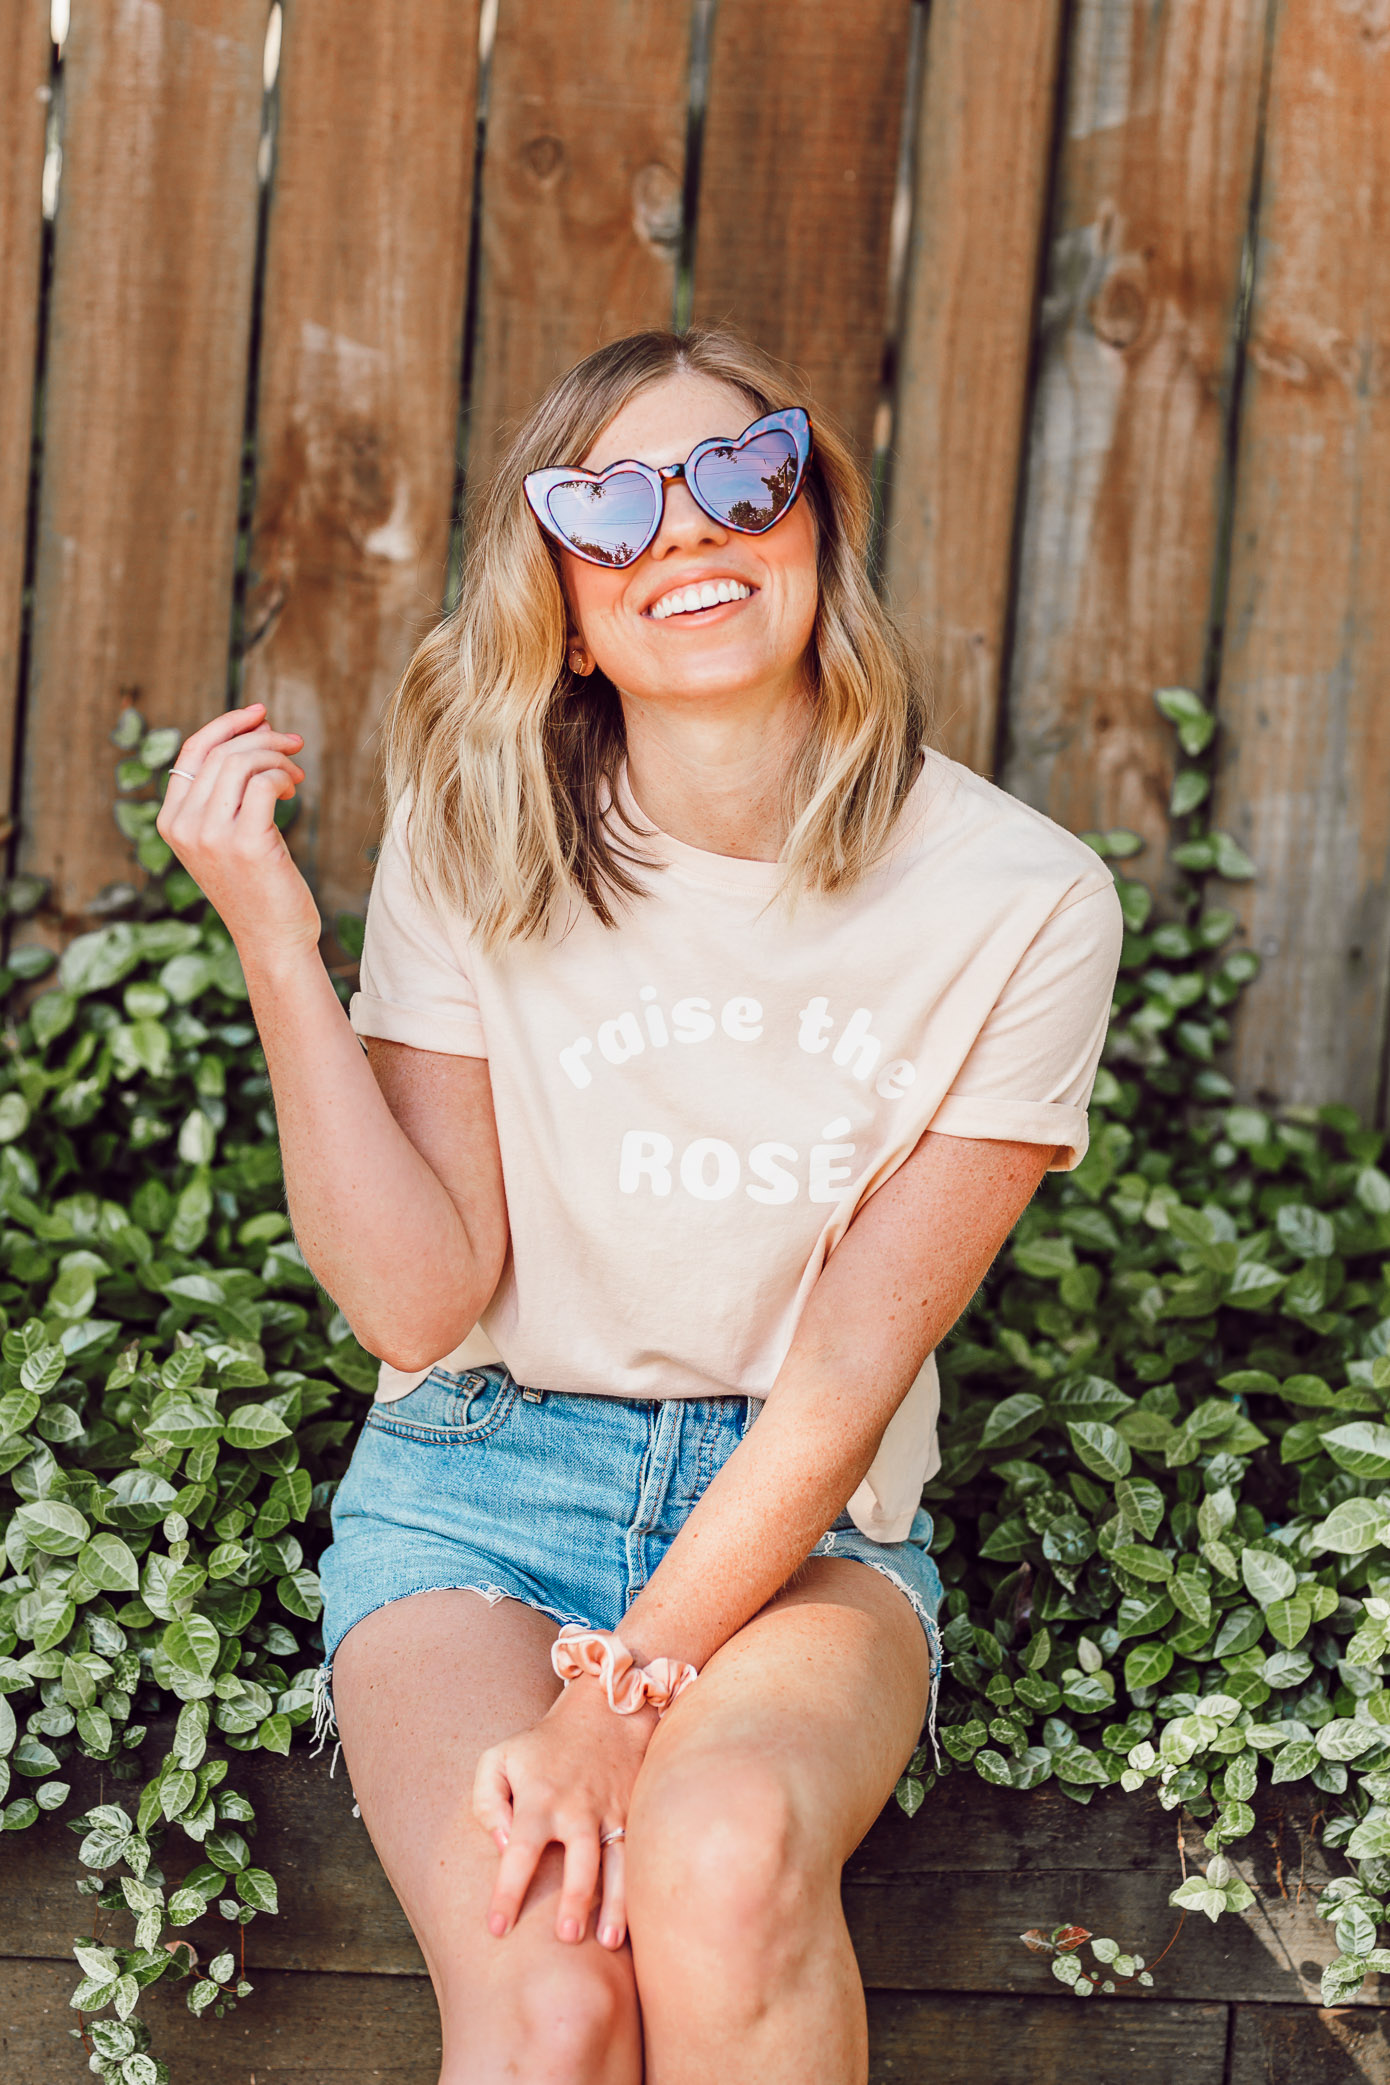 Raise the Rosé Graphic Tee | Cute Graphic Tees for Summer 2019 | Louella Reese